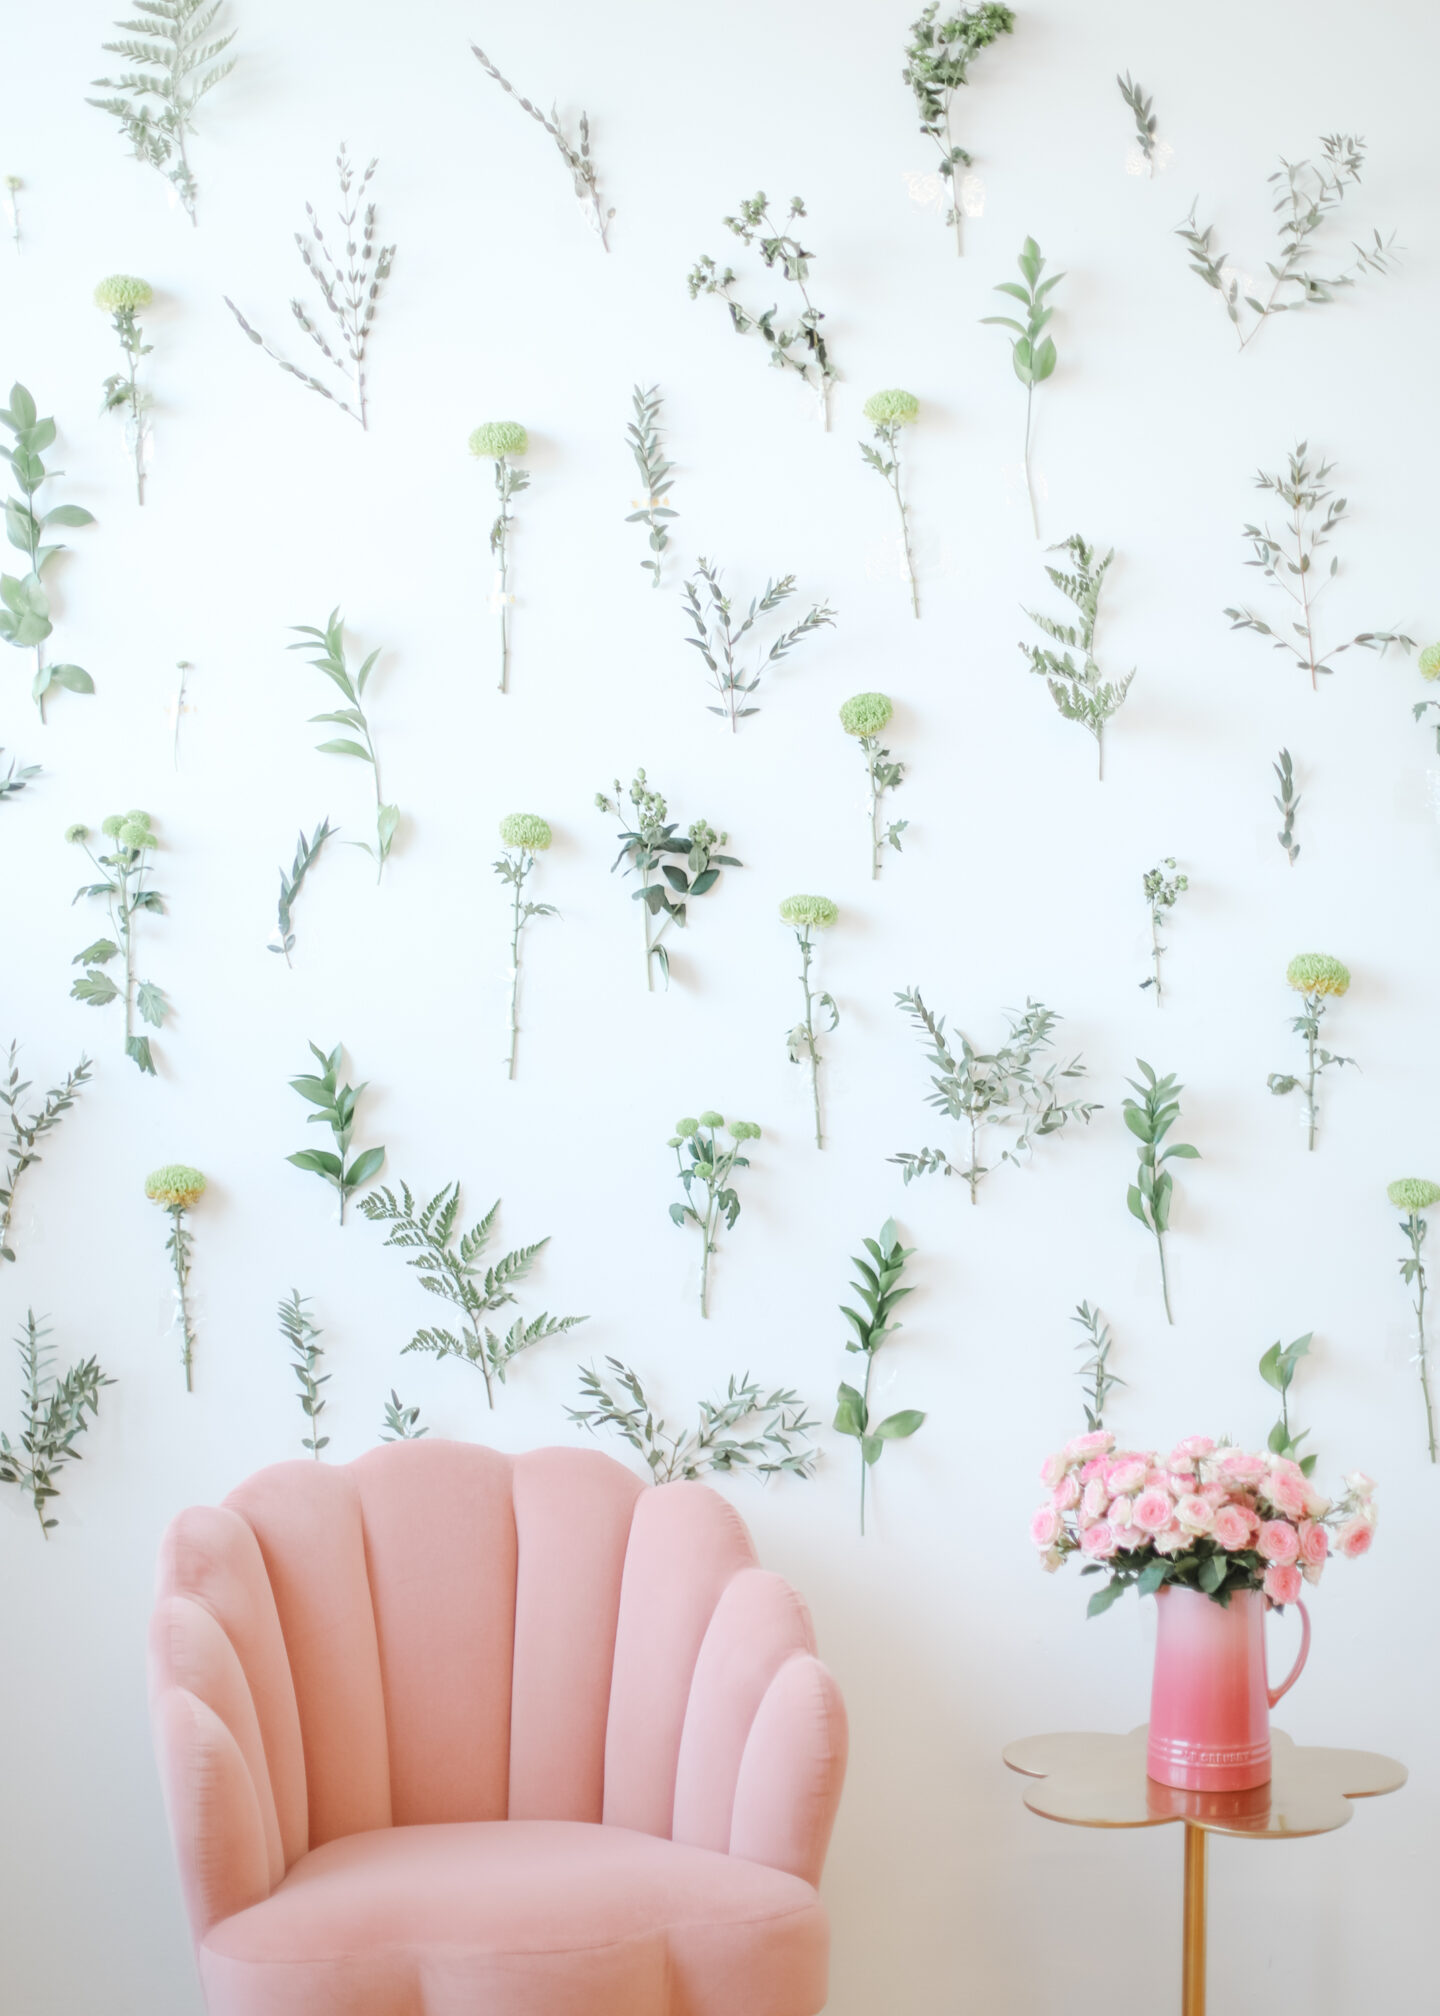 floral wall decor to welcome spring